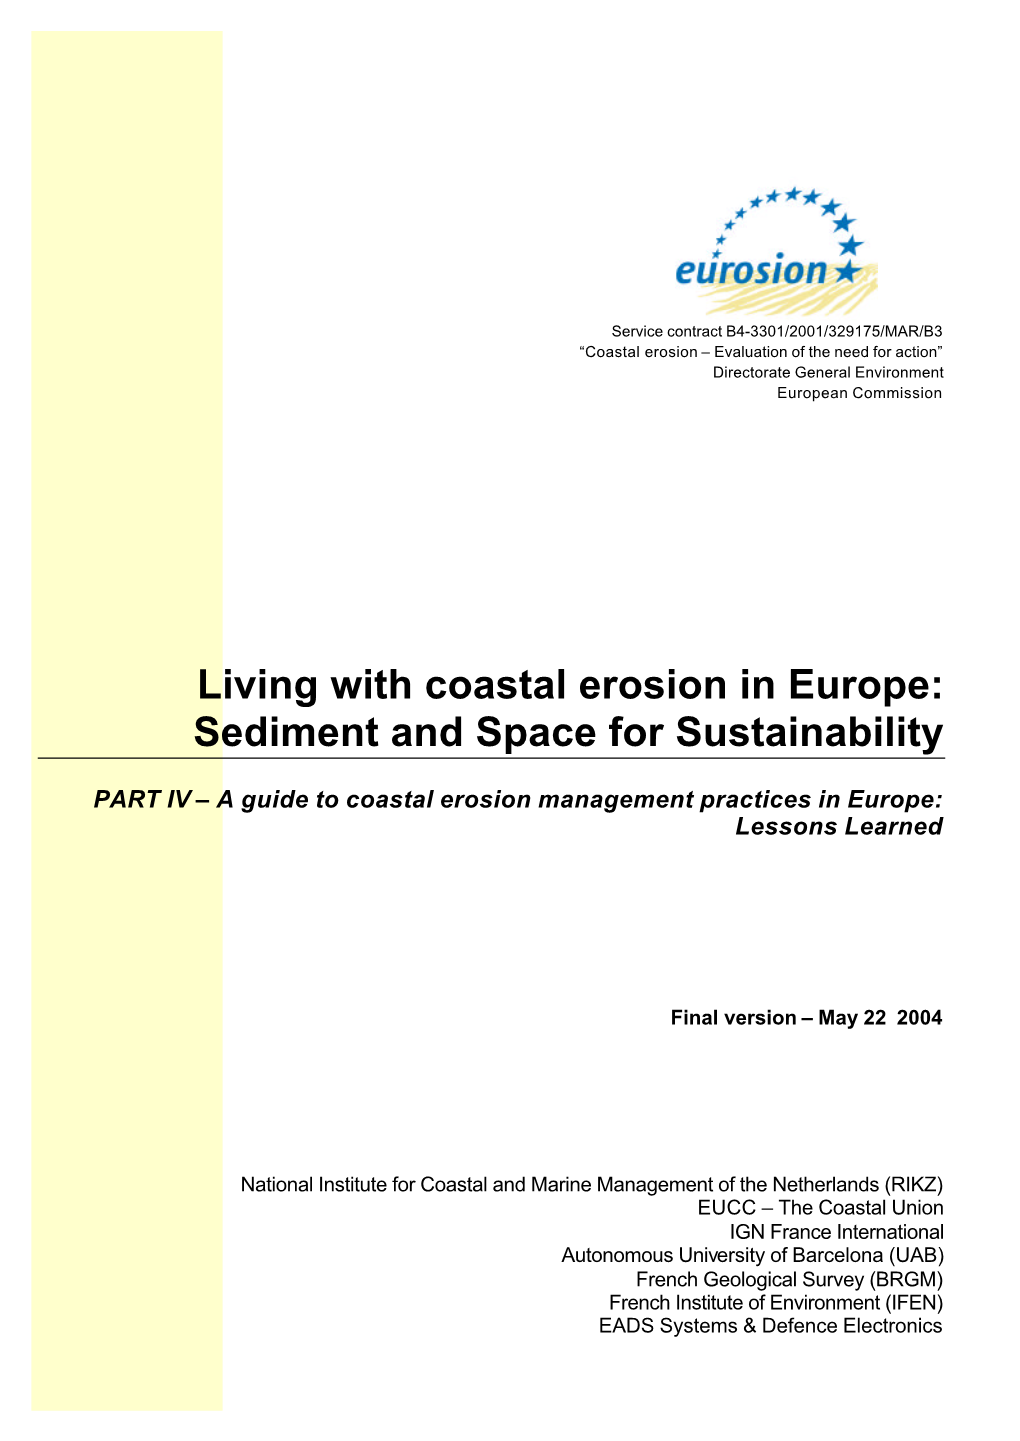 Living with Coastal Erosion in Europe: Sediment and Space for Sustainability